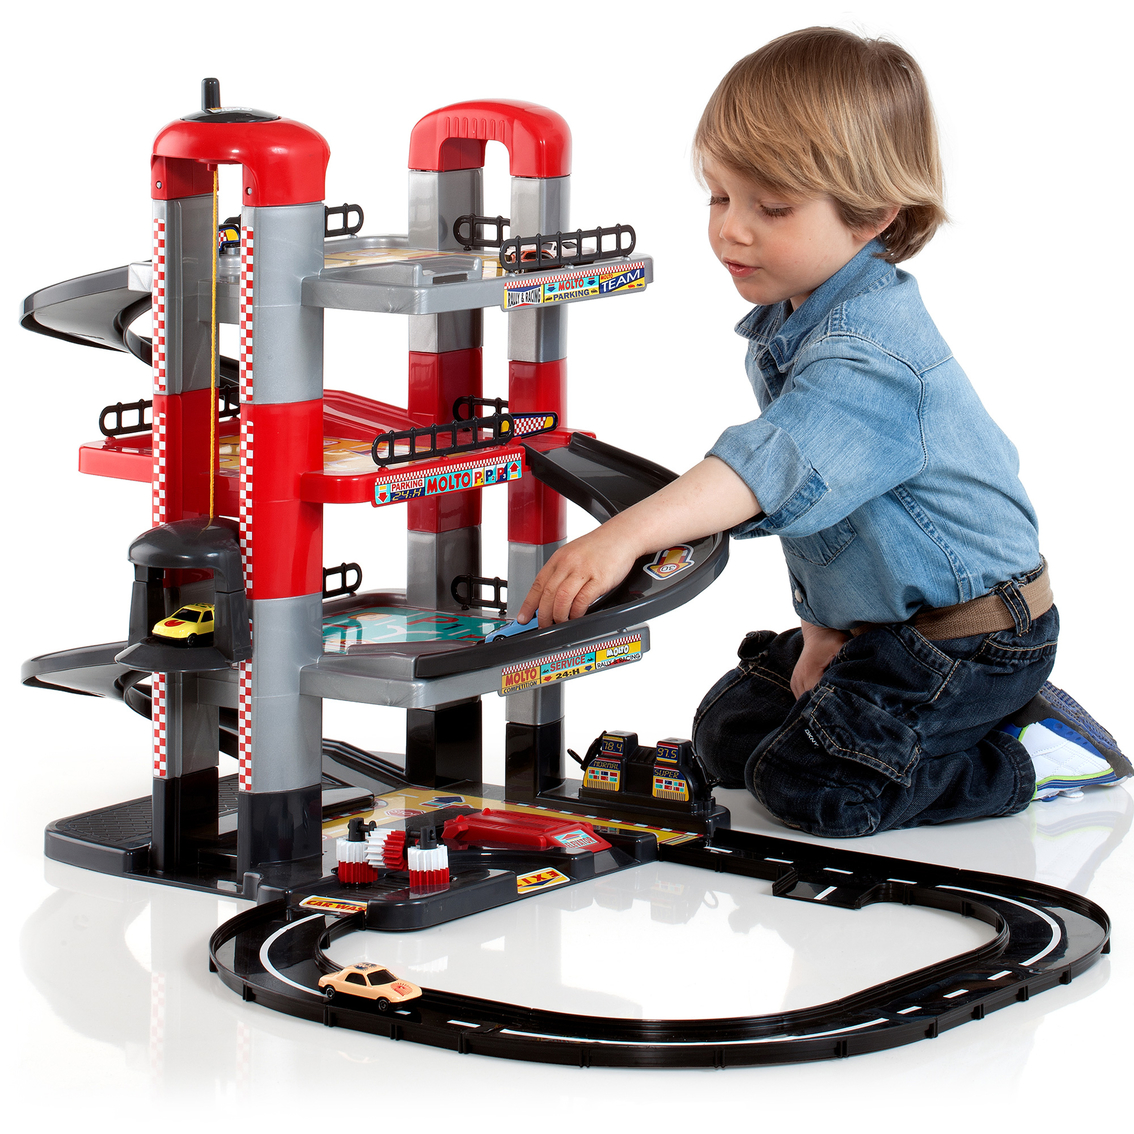 Molto 4 Story Parking Playset with Tracks - Image 4 of 4